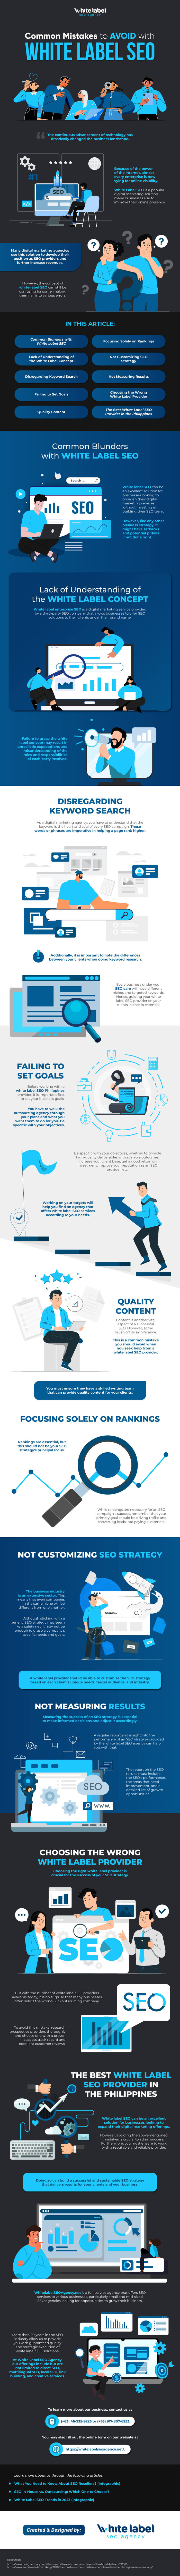 Common Mistakes to Avoid with White Label SEO Infographic